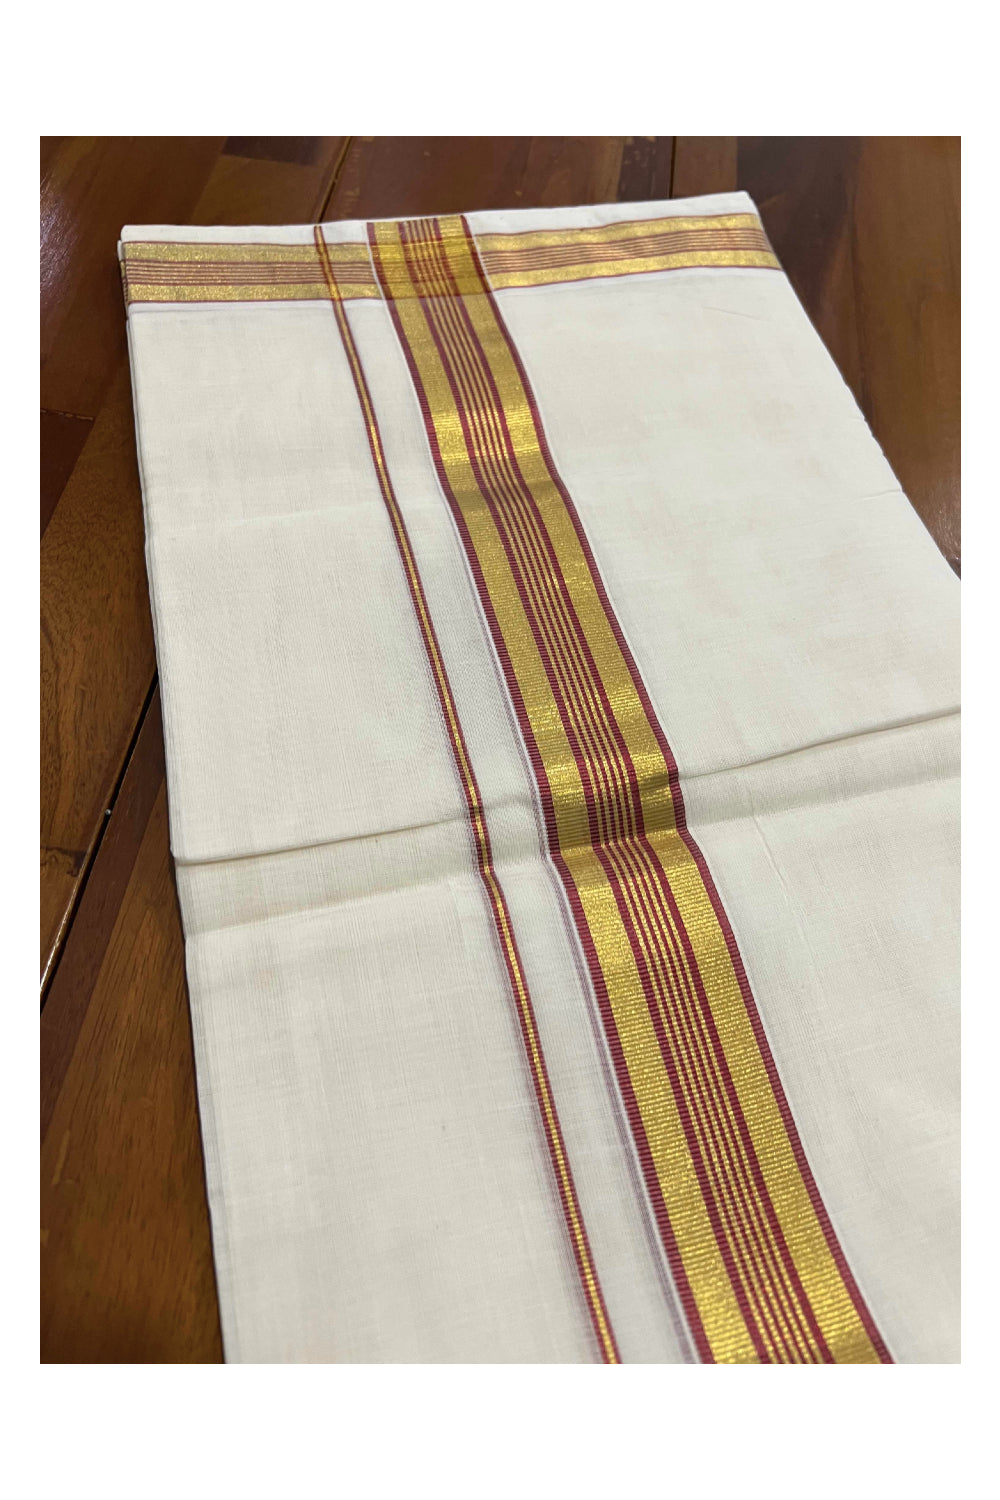 Southloom Kuthampully Handloom Pure Cotton Mundu with Golden and Red Kasavu Lines Border (South Indian Dhoti)